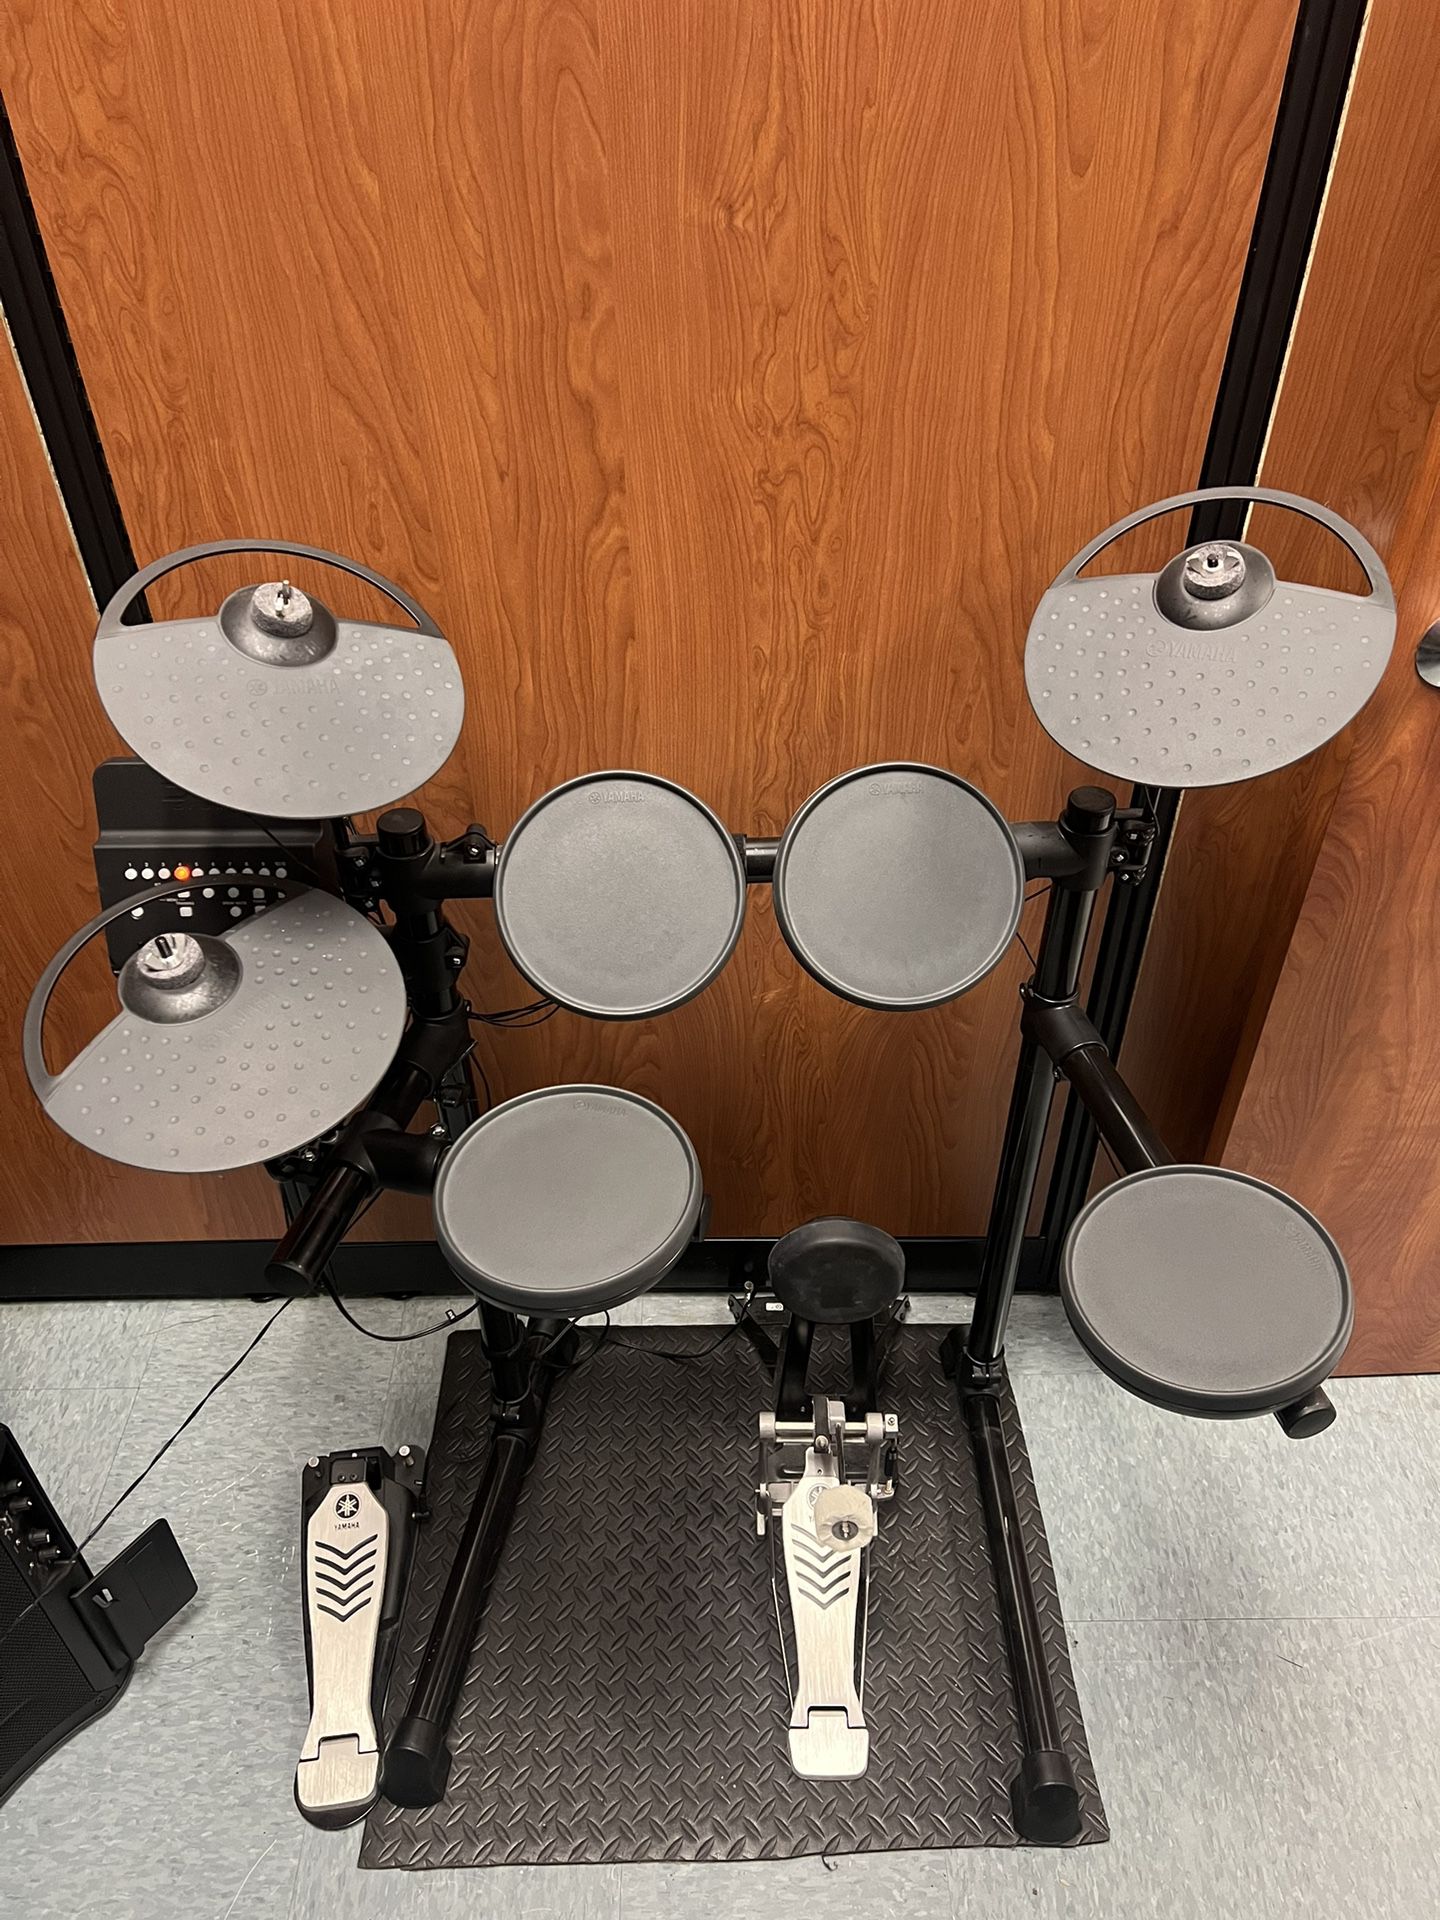 Yamaha DTX430K electronic Drum Set for Sale in Vista, CA - OfferUp